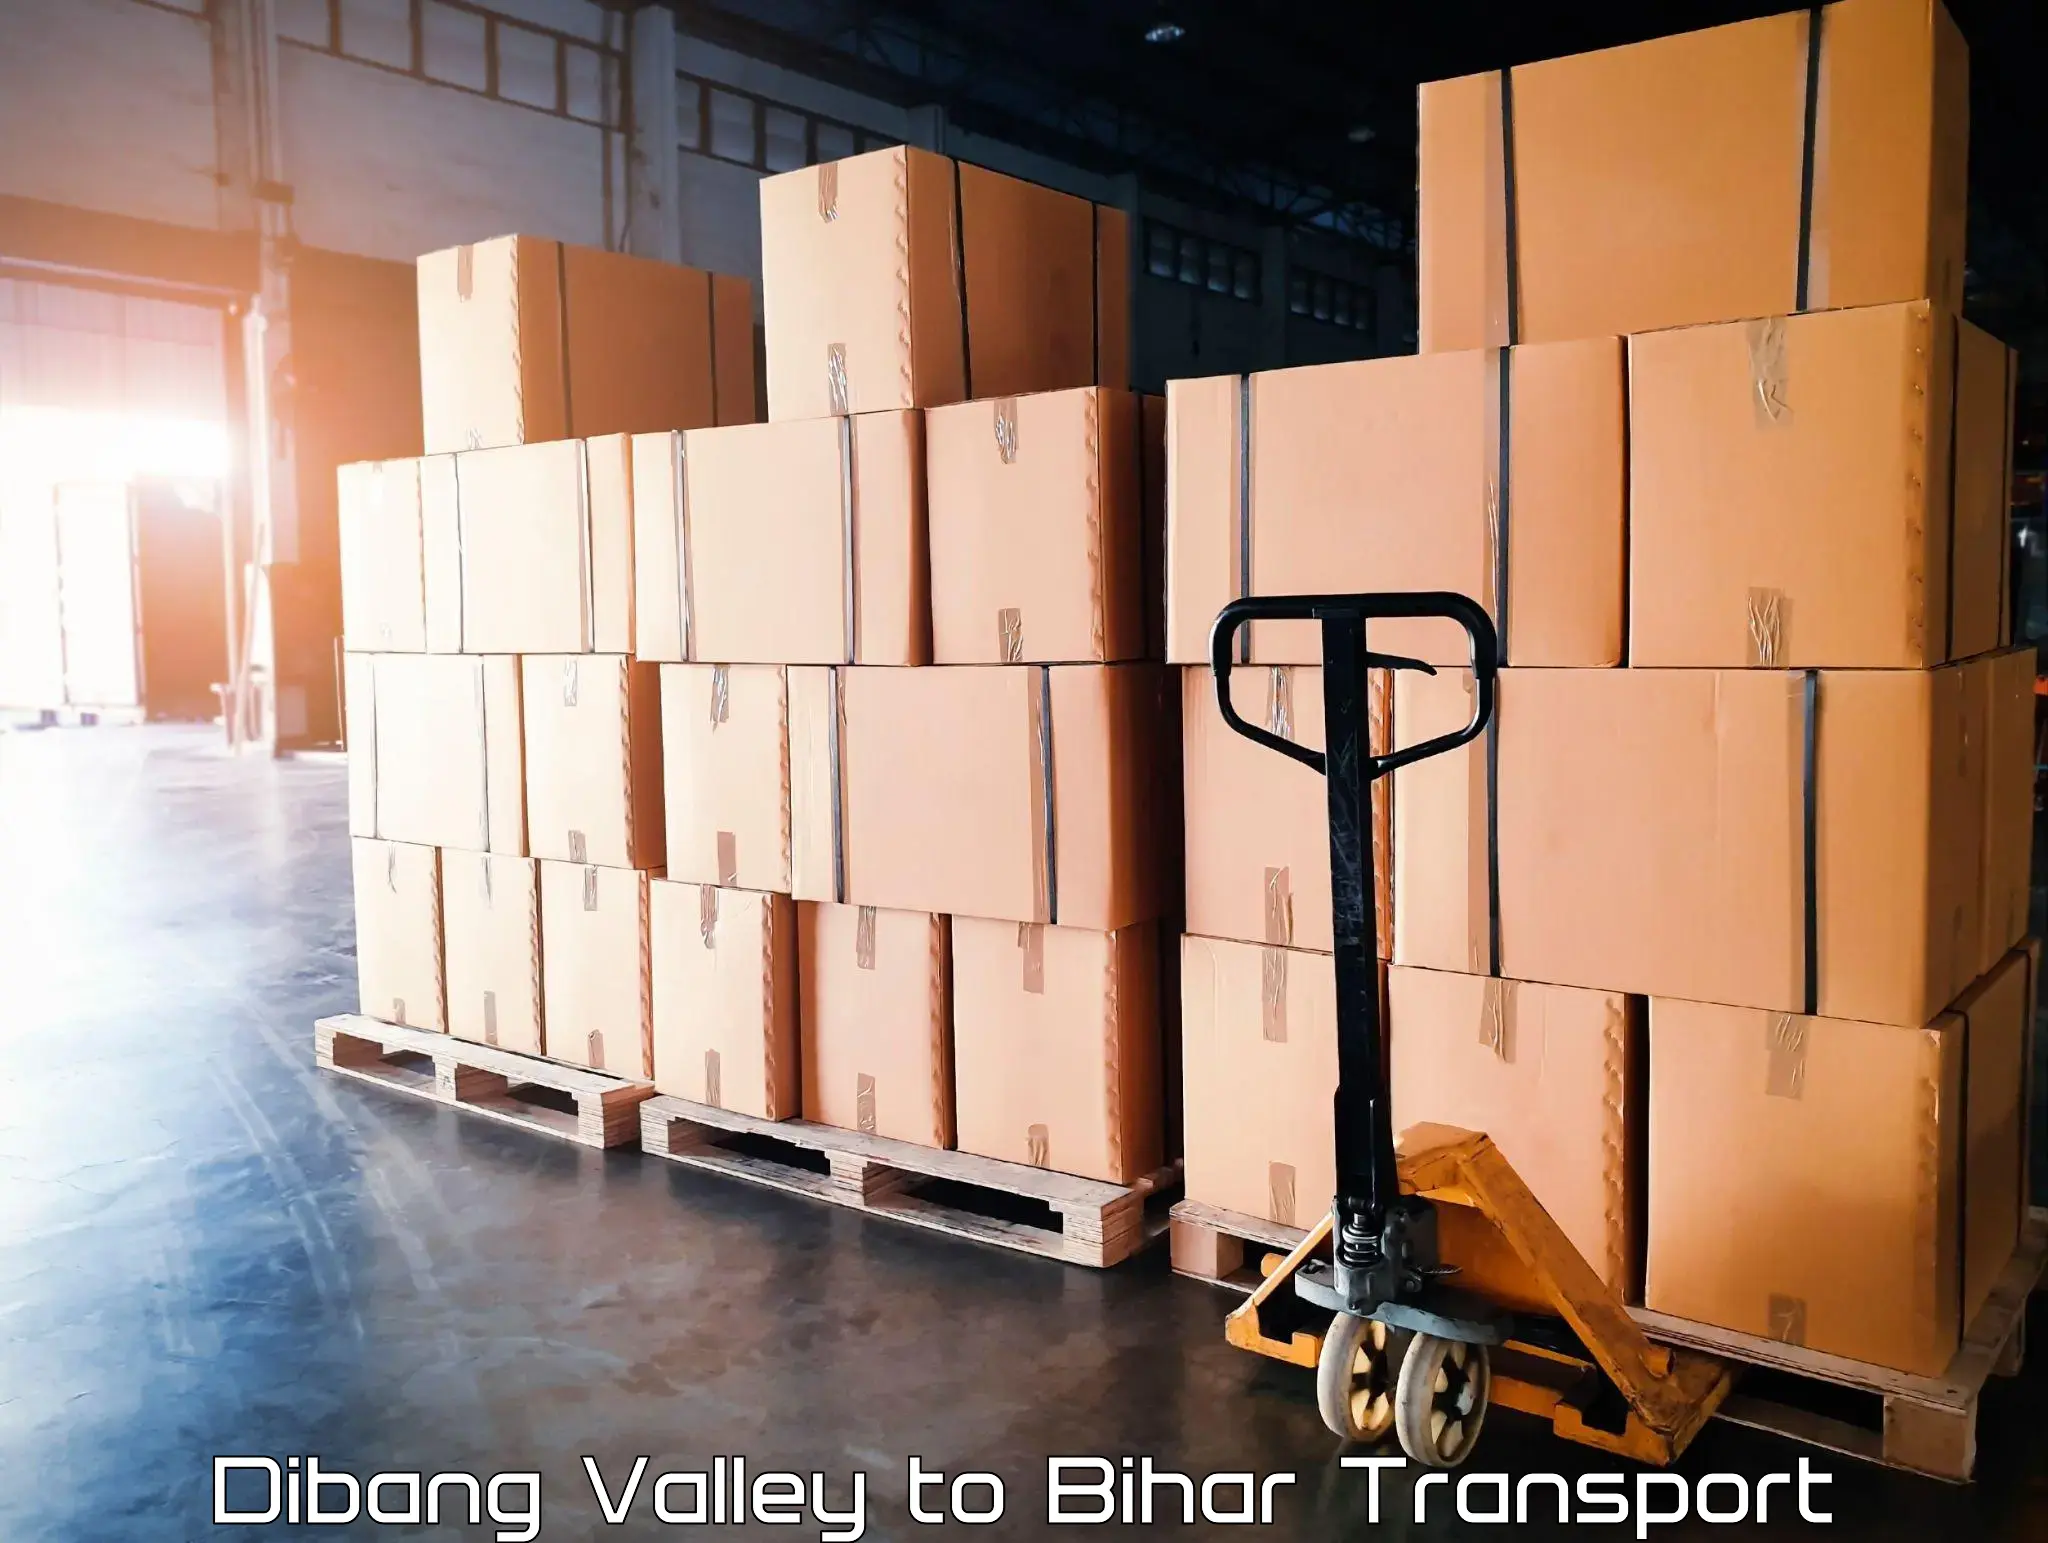 Truck transport companies in India Dibang Valley to Sheonar